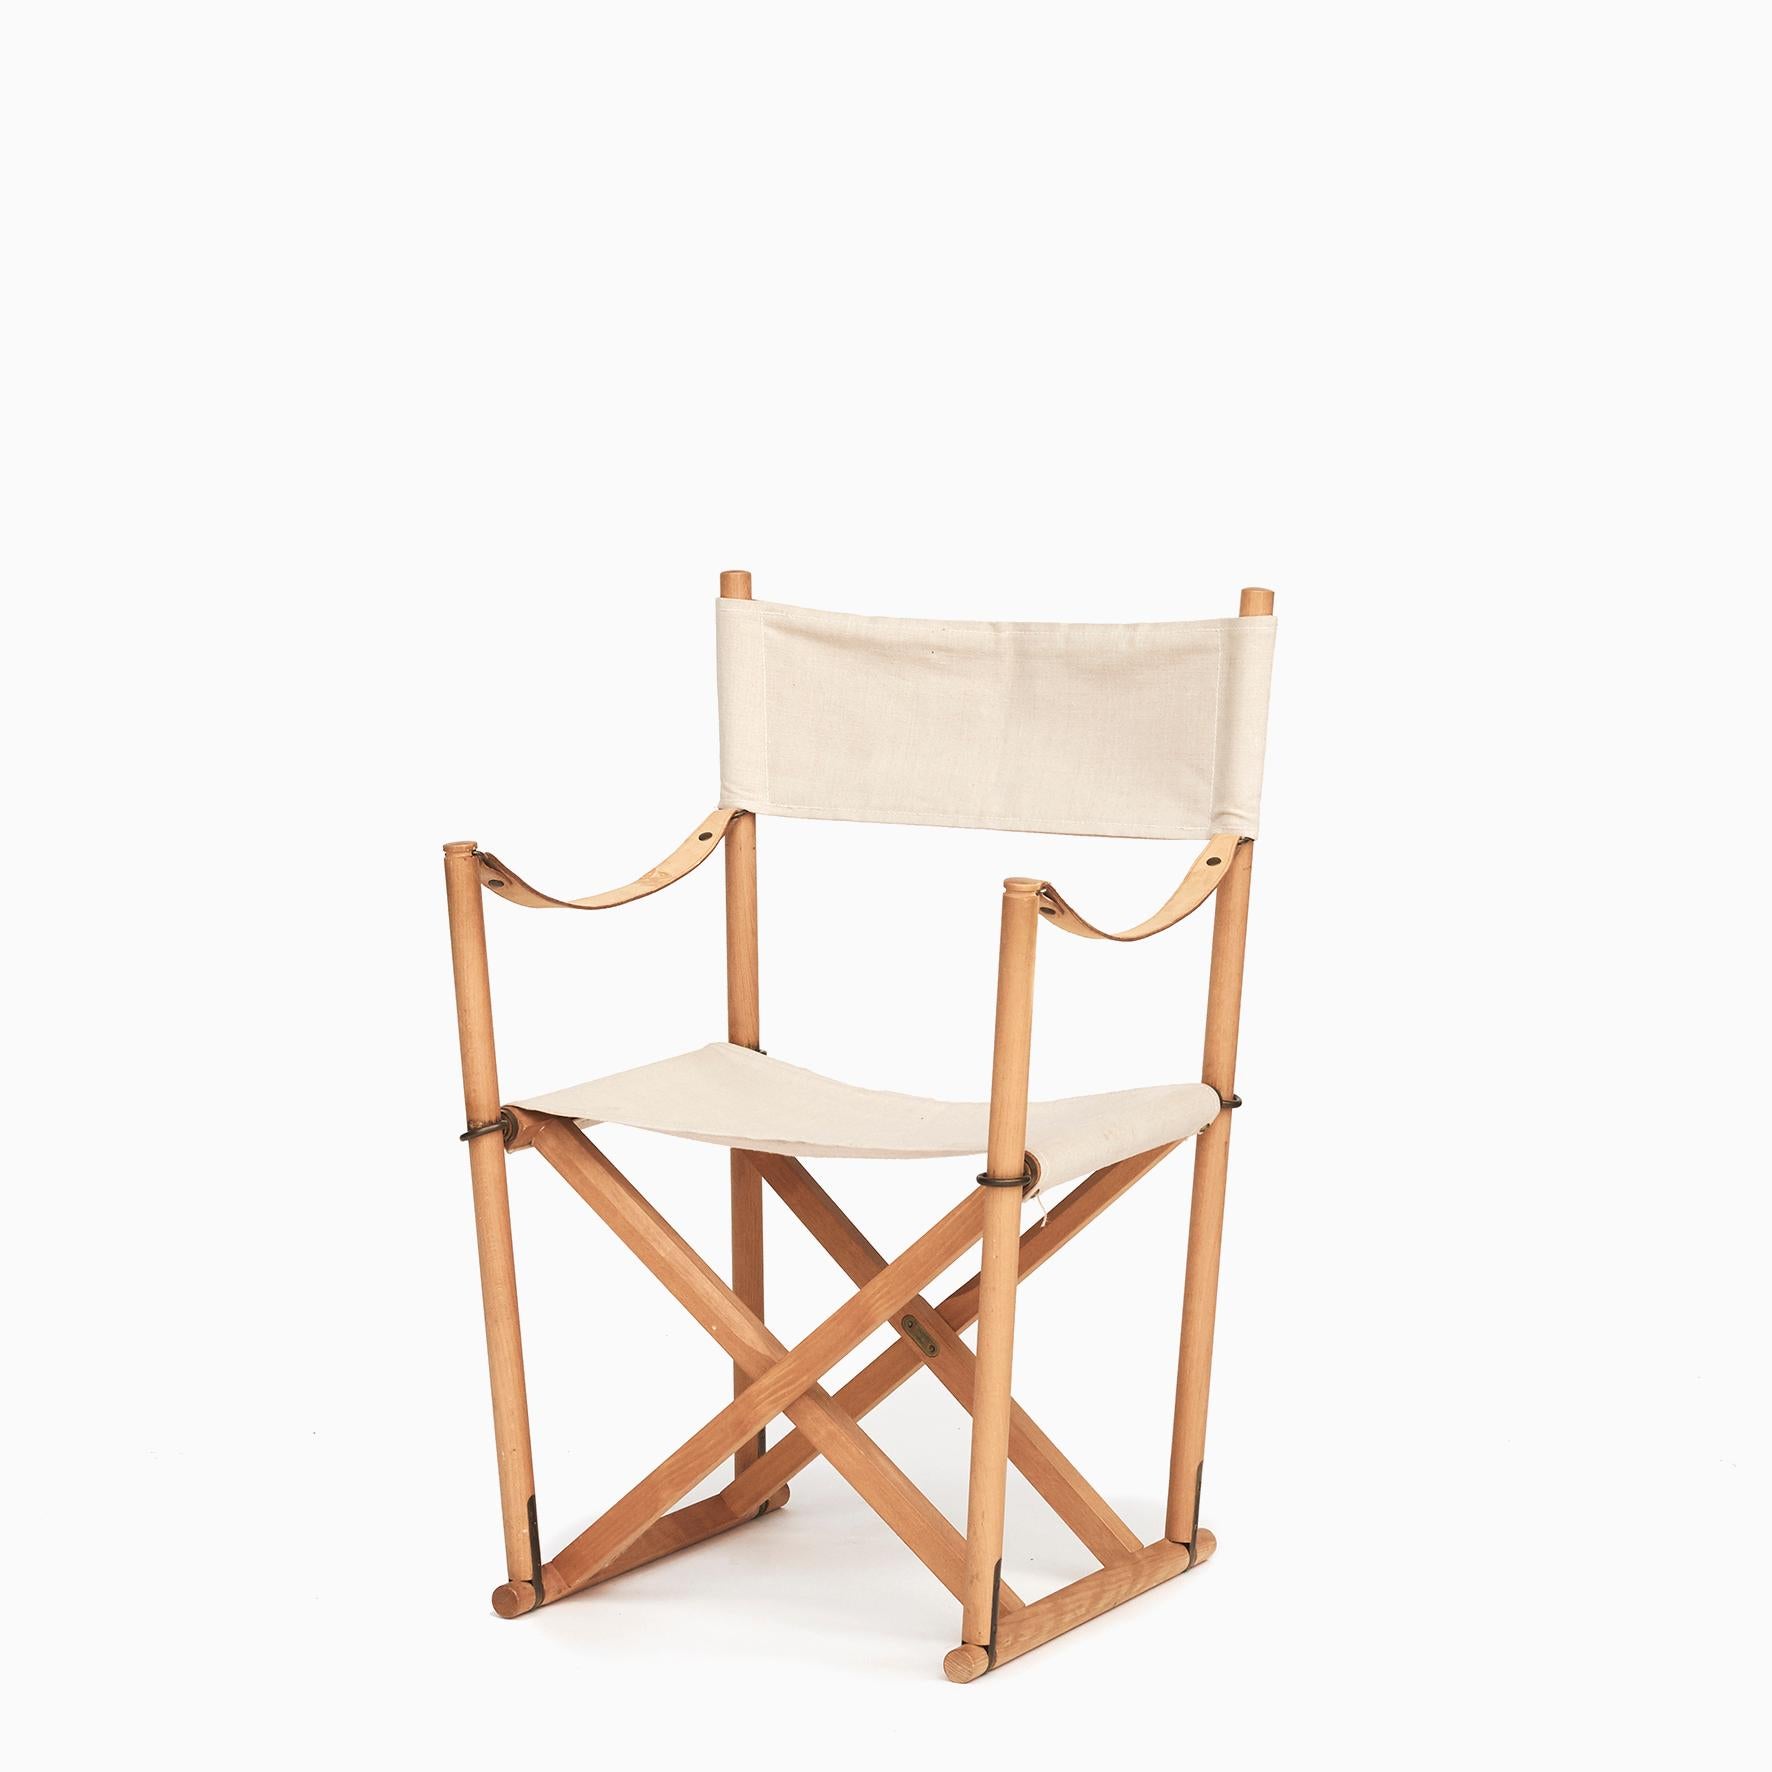 Mogens Koch 1898 - 1992. Folding chair from Cado.
Seat and back of light canvas, arm straps of grain leather.

Designed 1932, Denmark.